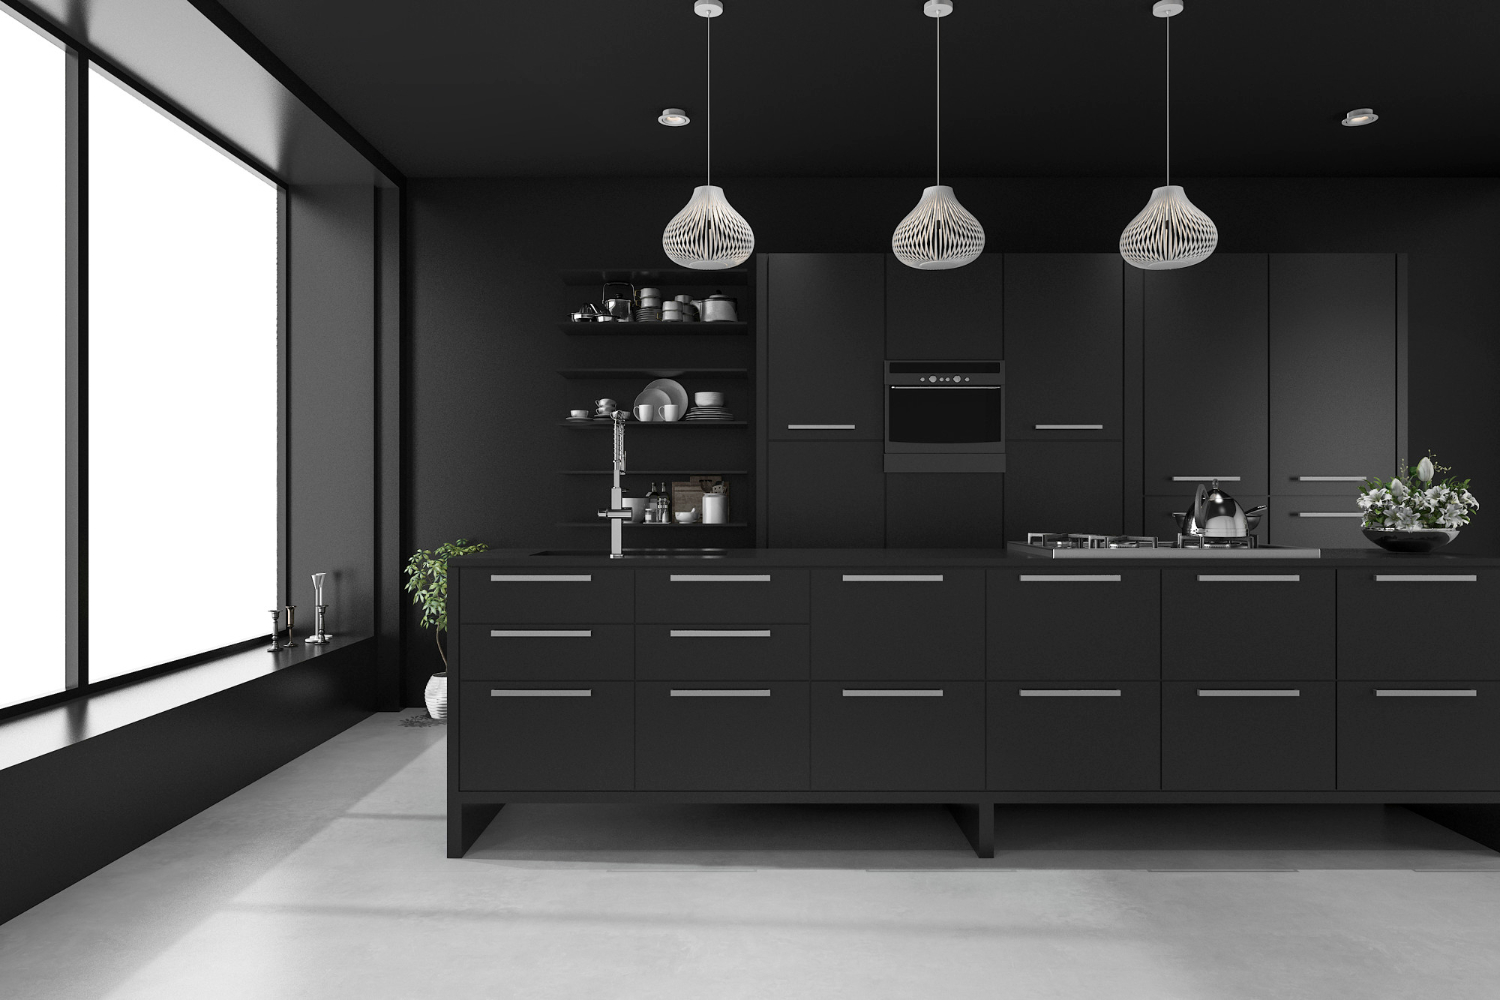 Kitchen in black – inspirations